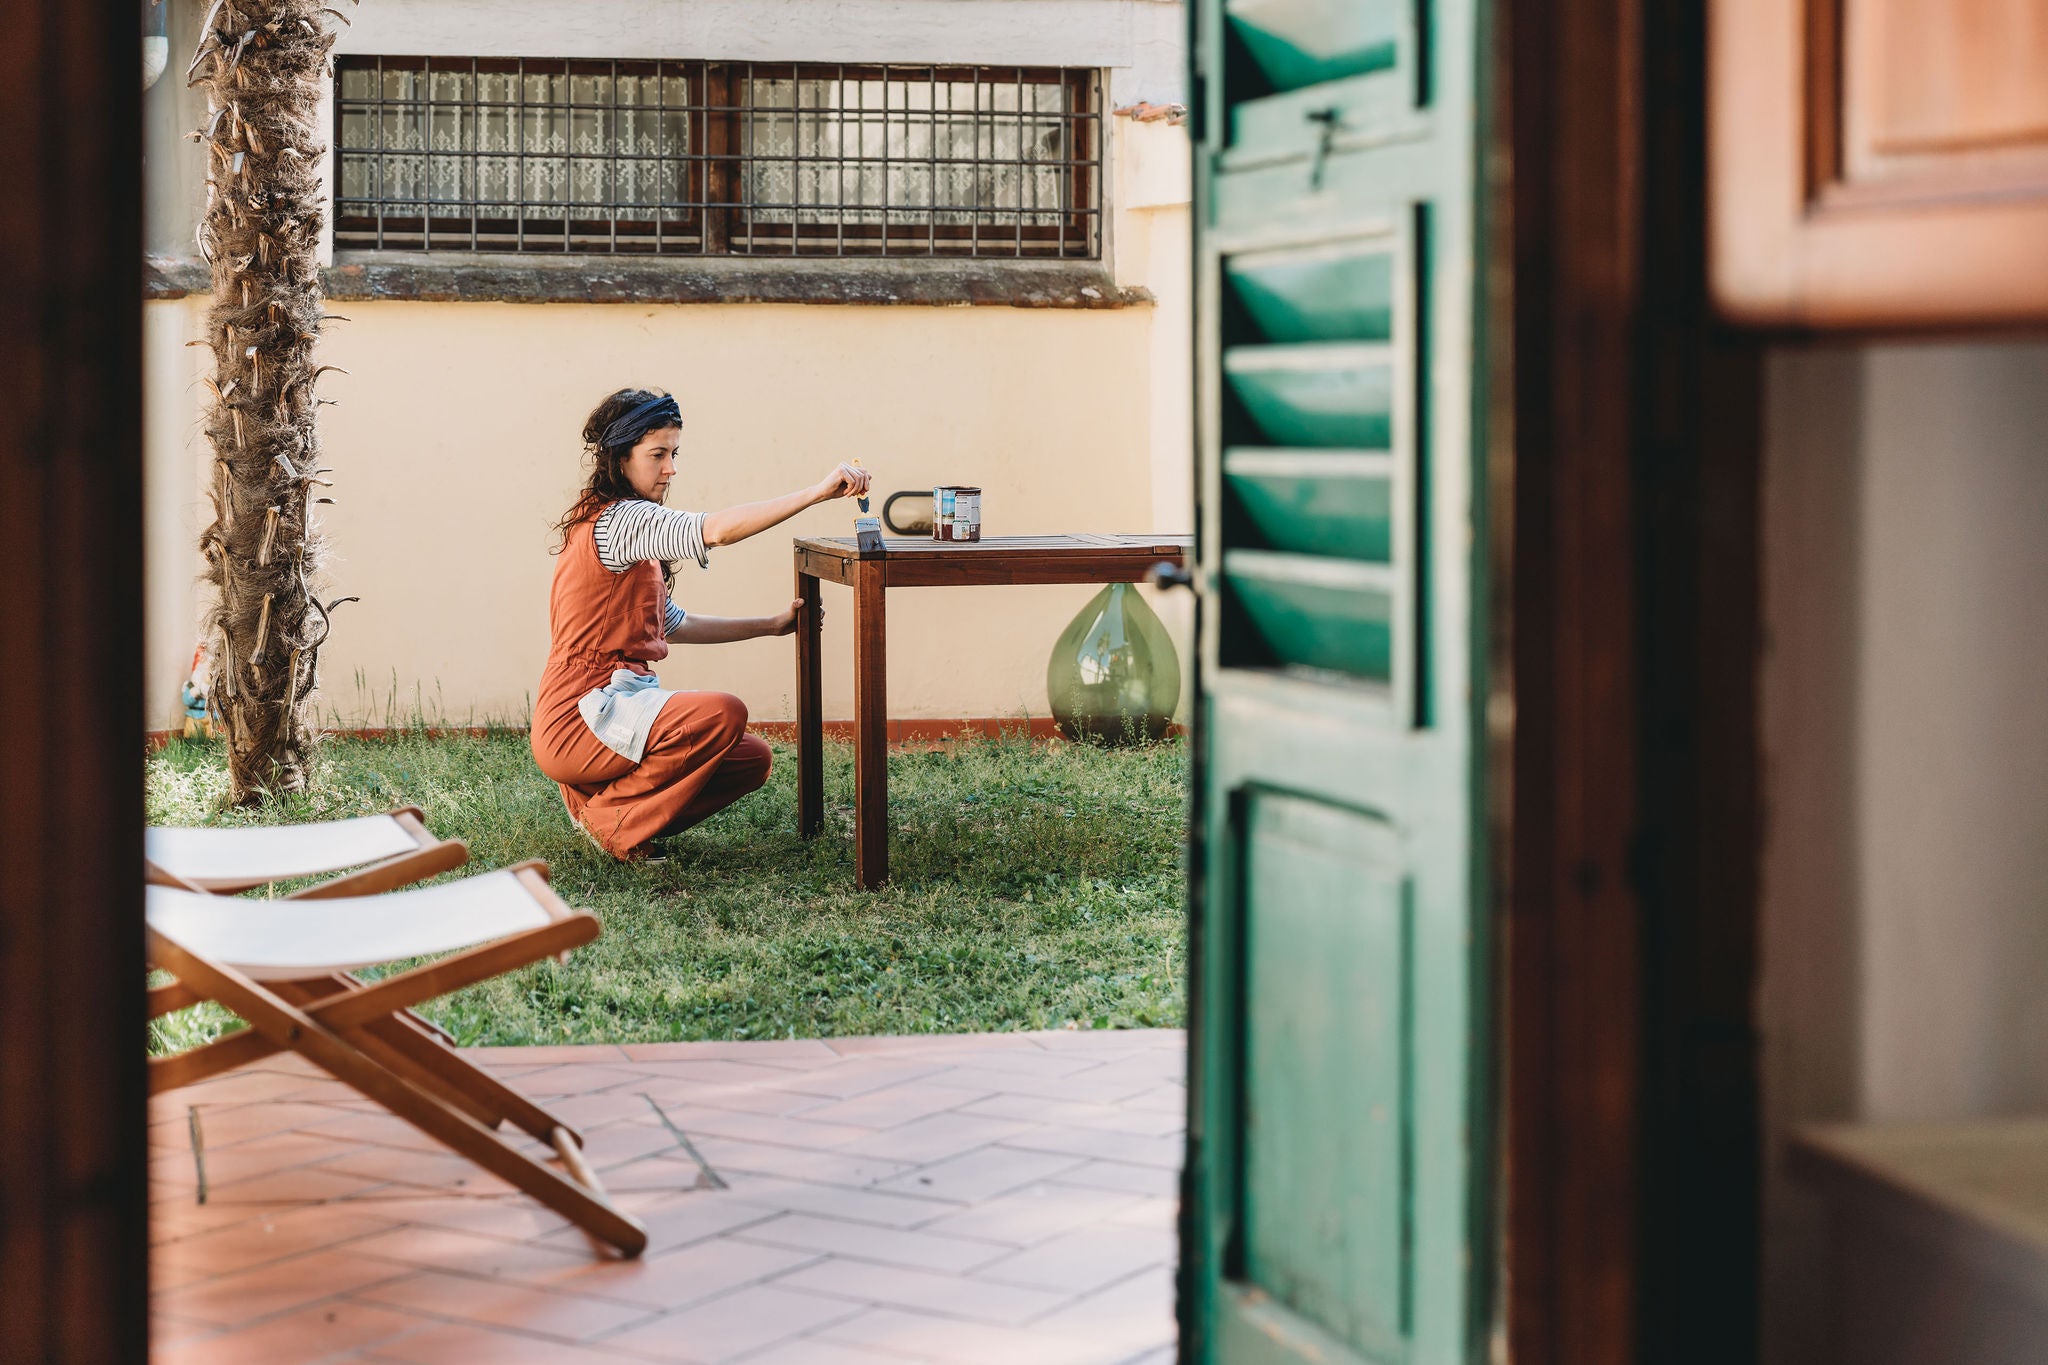 Young woman painting a wooden table in the back yard of her home. She's doing improvements during the Coronavirus Covid-19 quarantine.